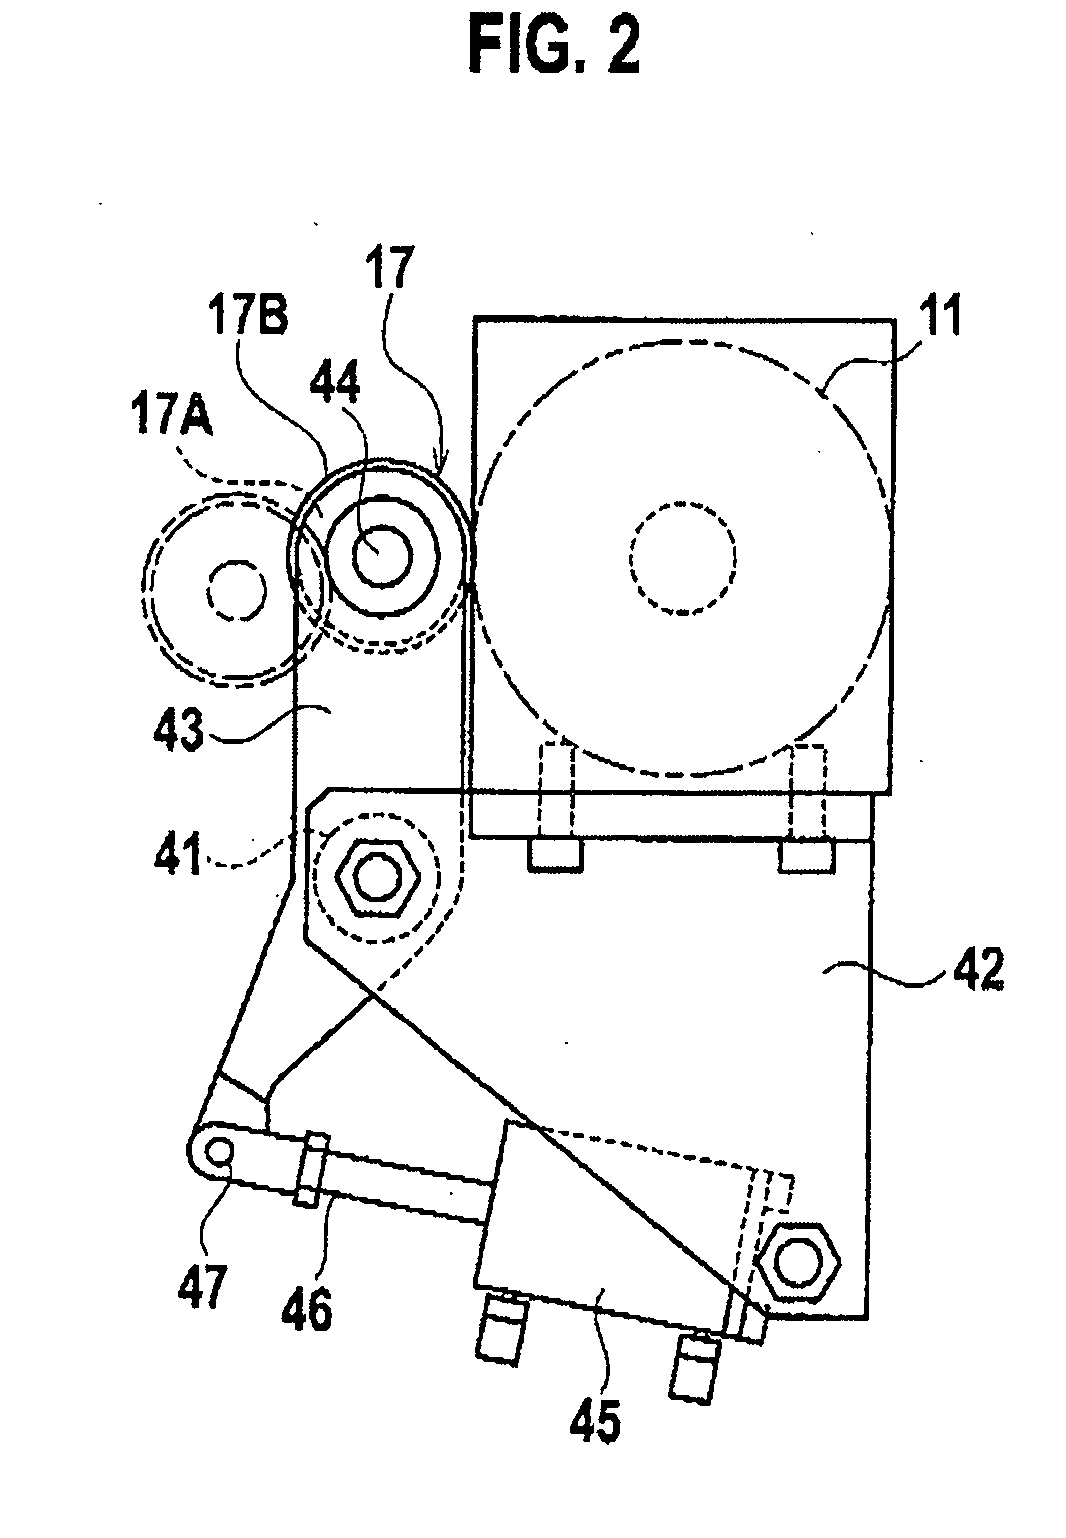 Porous film manufacturing method and successive biaxial stretching apparatus for manufacturing porous film